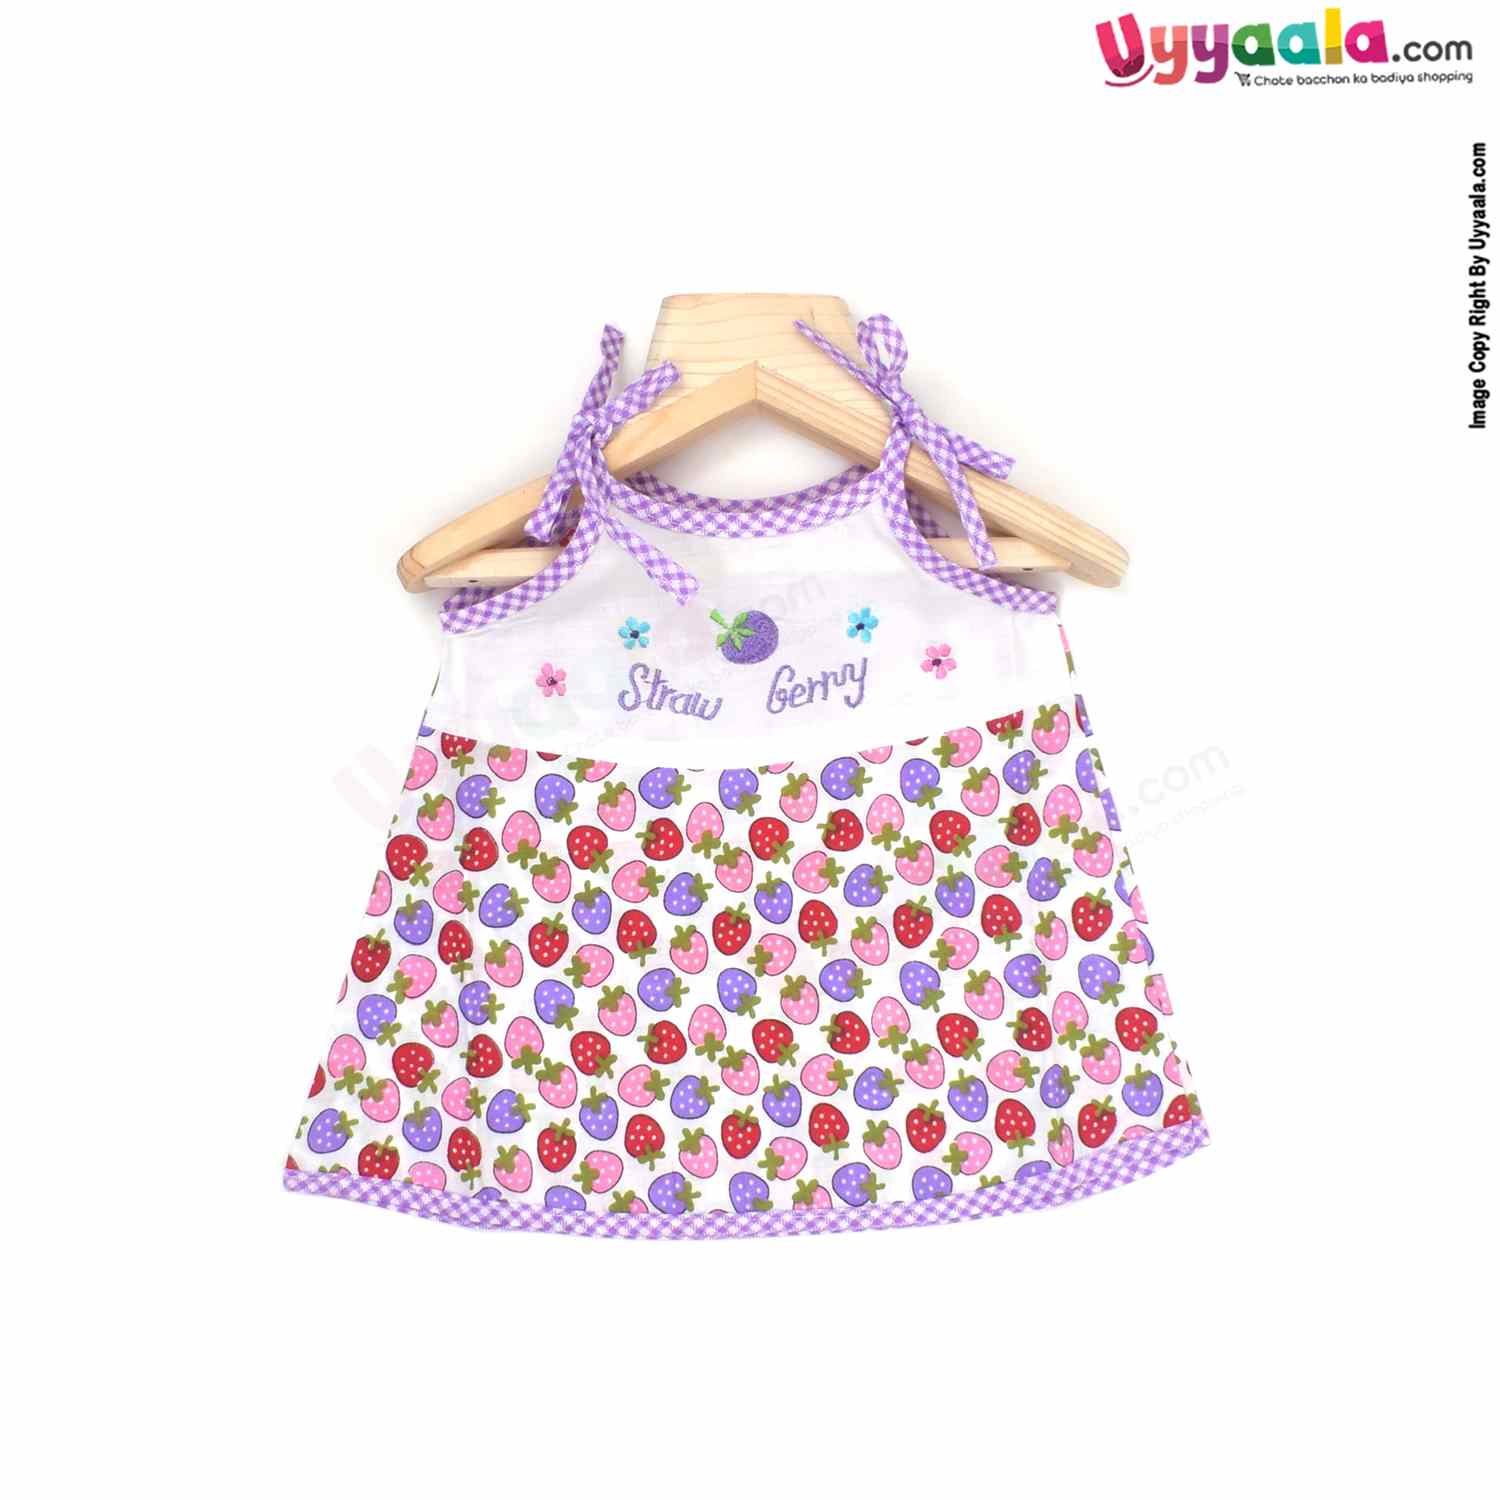 Sleeveless Newborn Baby Frock, Top Opening Tie Knot Lace Model, Premium Quality Cotton Baby Wear. Strawberry Print, (0-30Days)